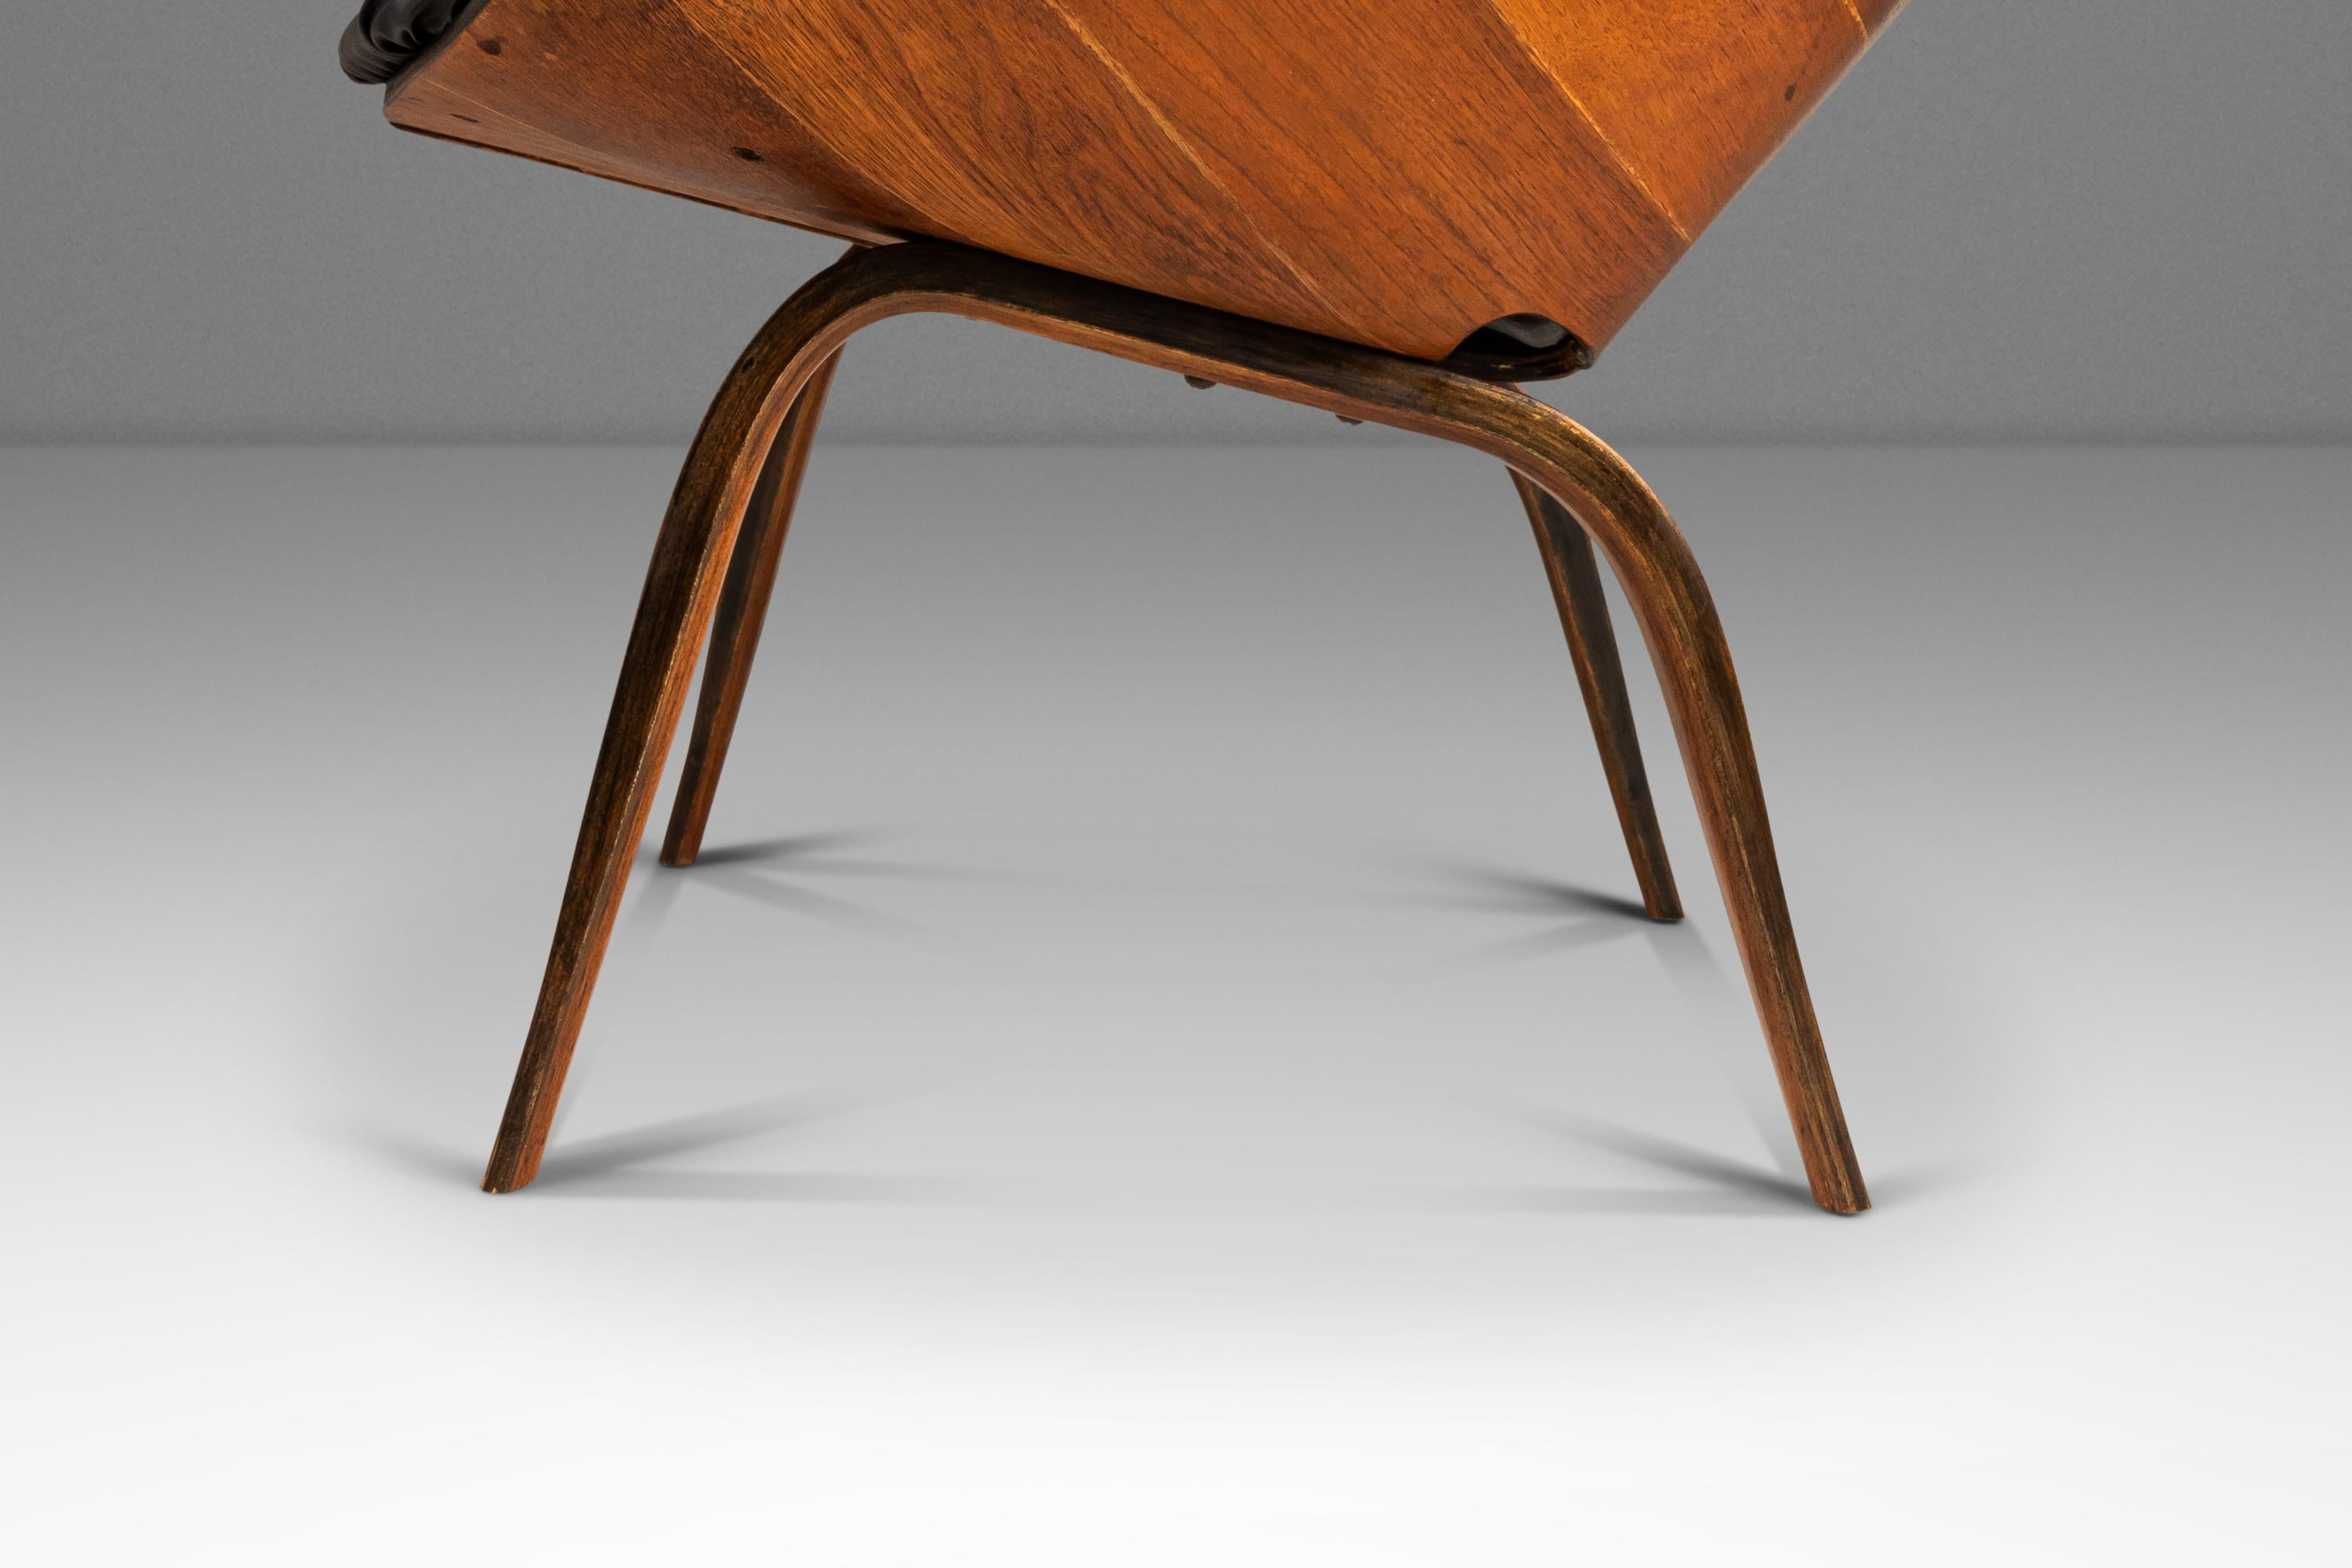 Mrs. Lounge Chair in Walnut & Vinyl by George Mulhauser for Plycraft, c. 1960s For Sale 8